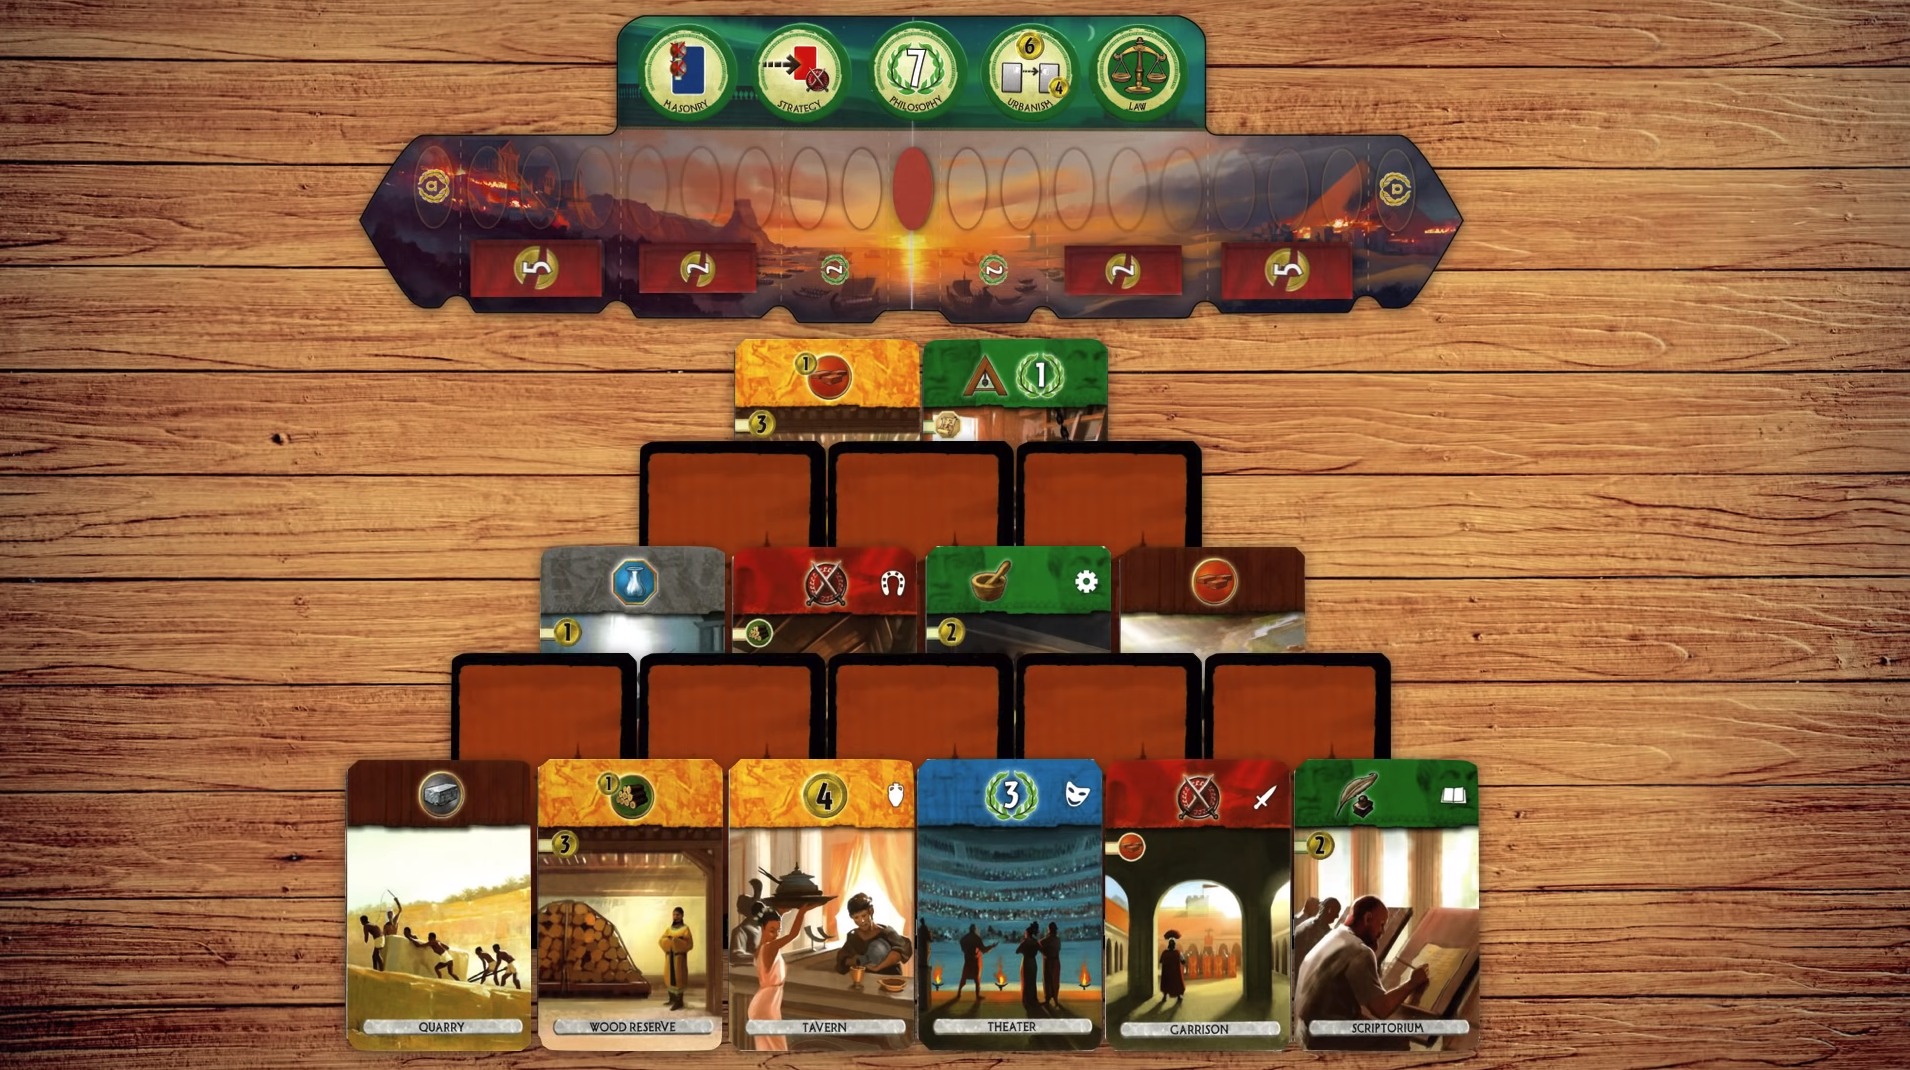 7 Wonders Duel - How To Play 